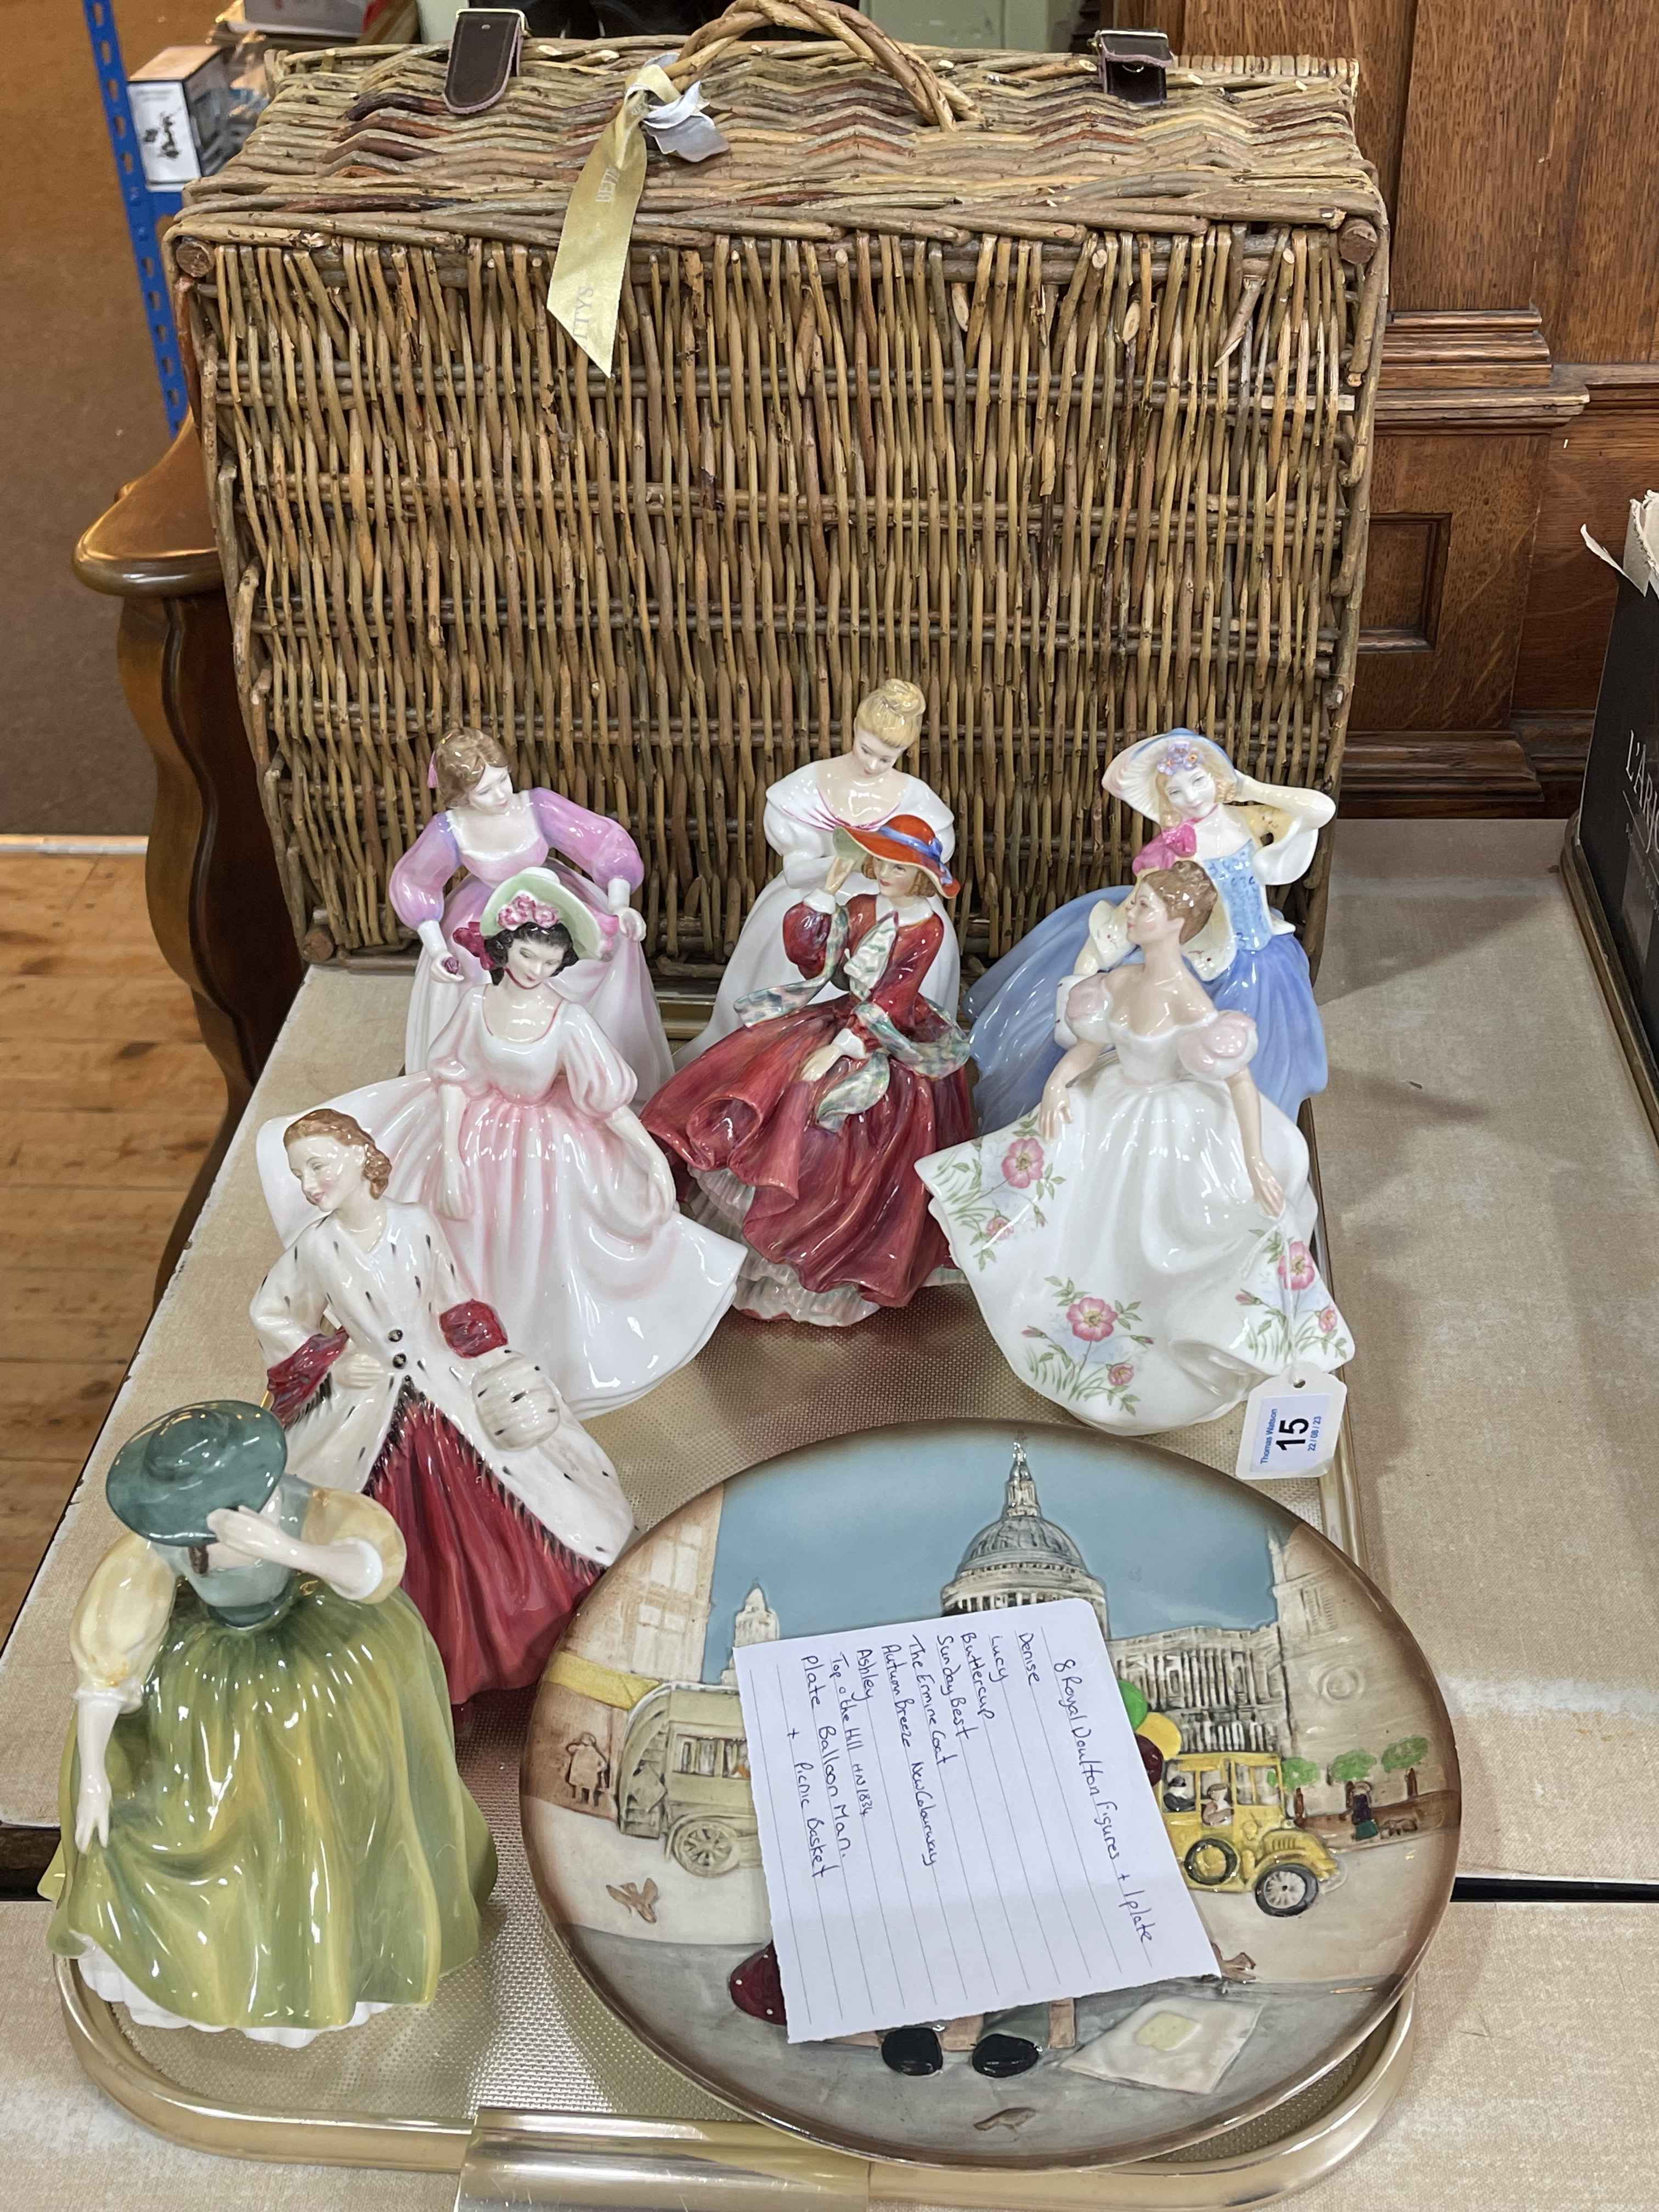 Eight Royal Doulton ladies, Balloon Man plate and wicker picnic basket.